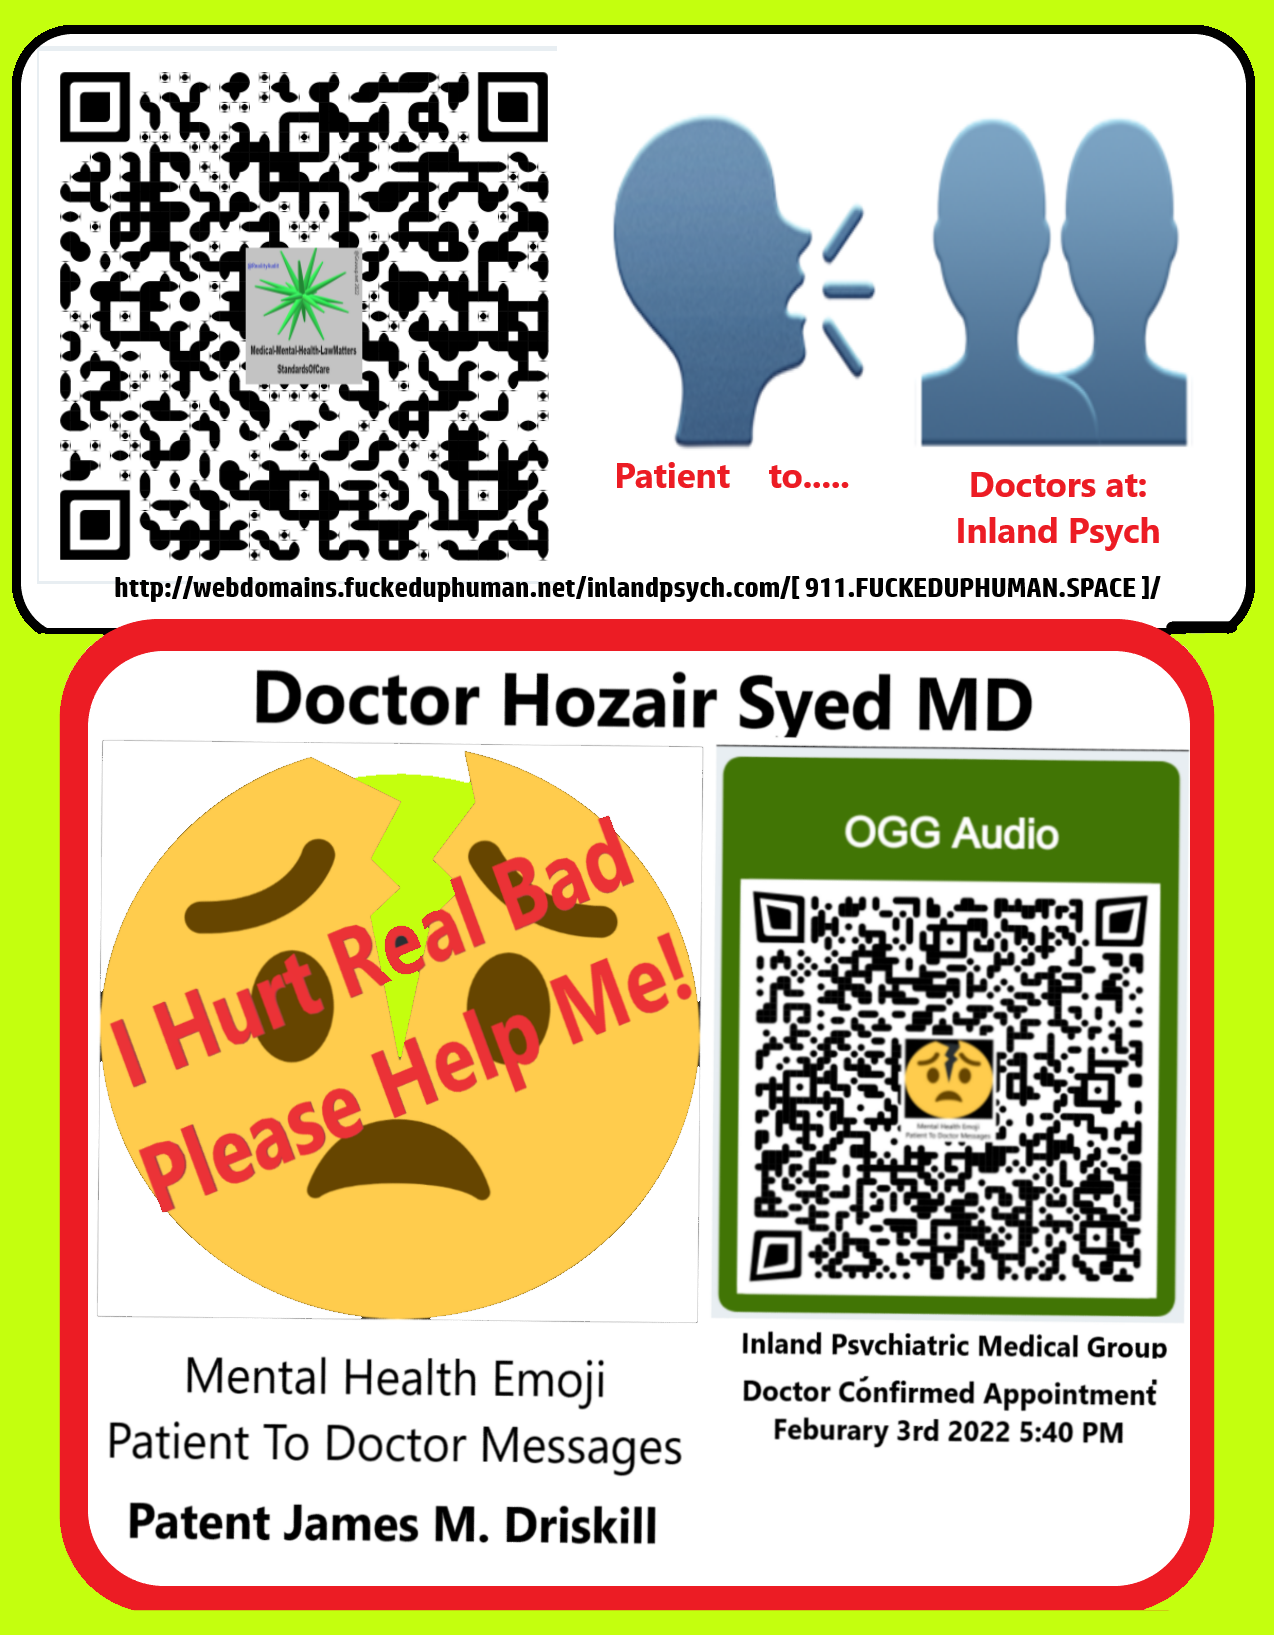 Kareo-ConfirmedDoctorAppointment-Feb032022-540pm-Doctor-Hozair-Syed-Md[2].png